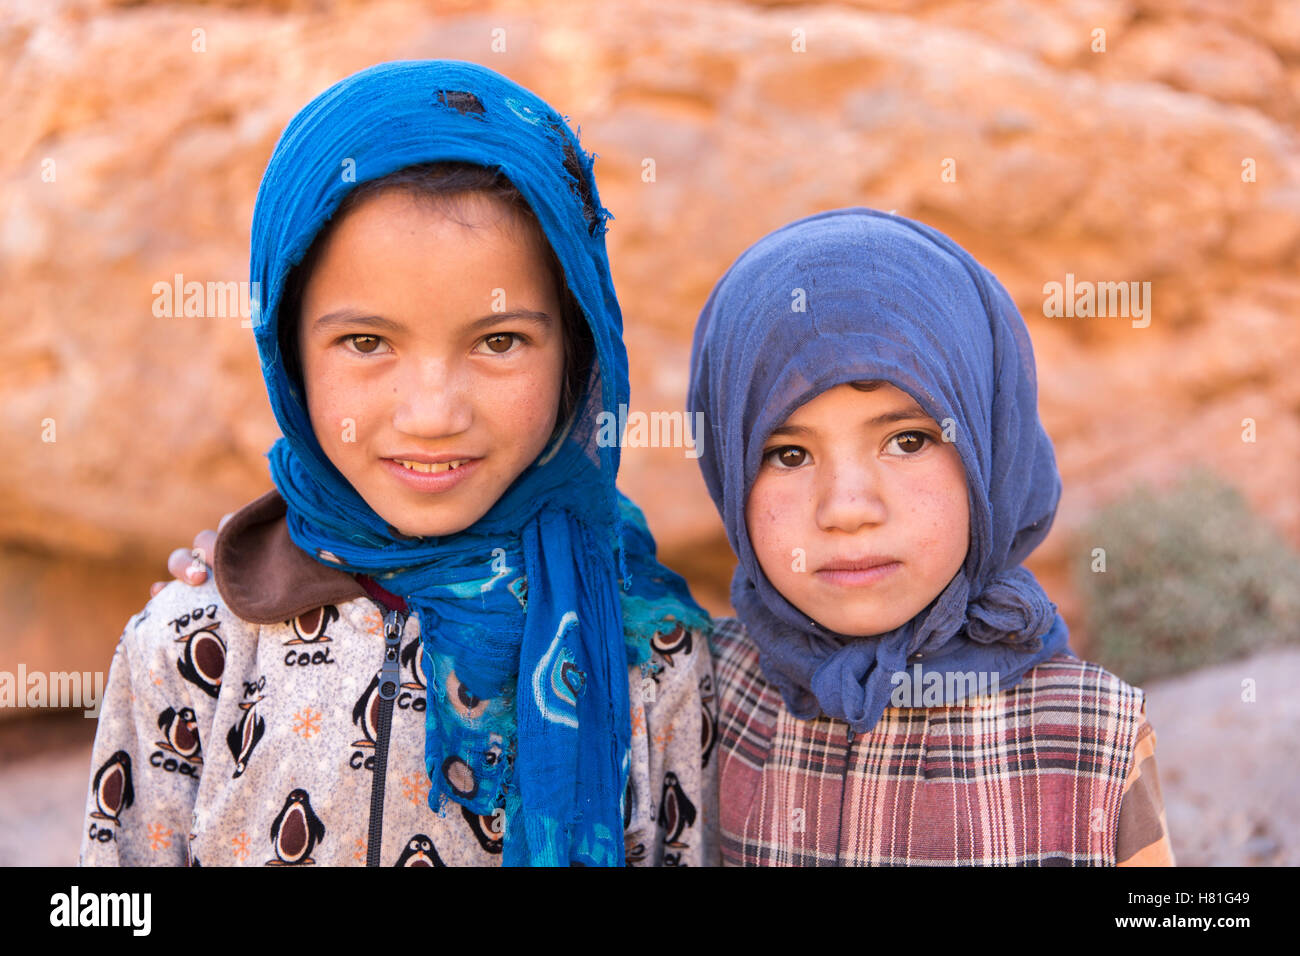 Morocco,Todra Gorge, portrait of two nomad children Stock Photo